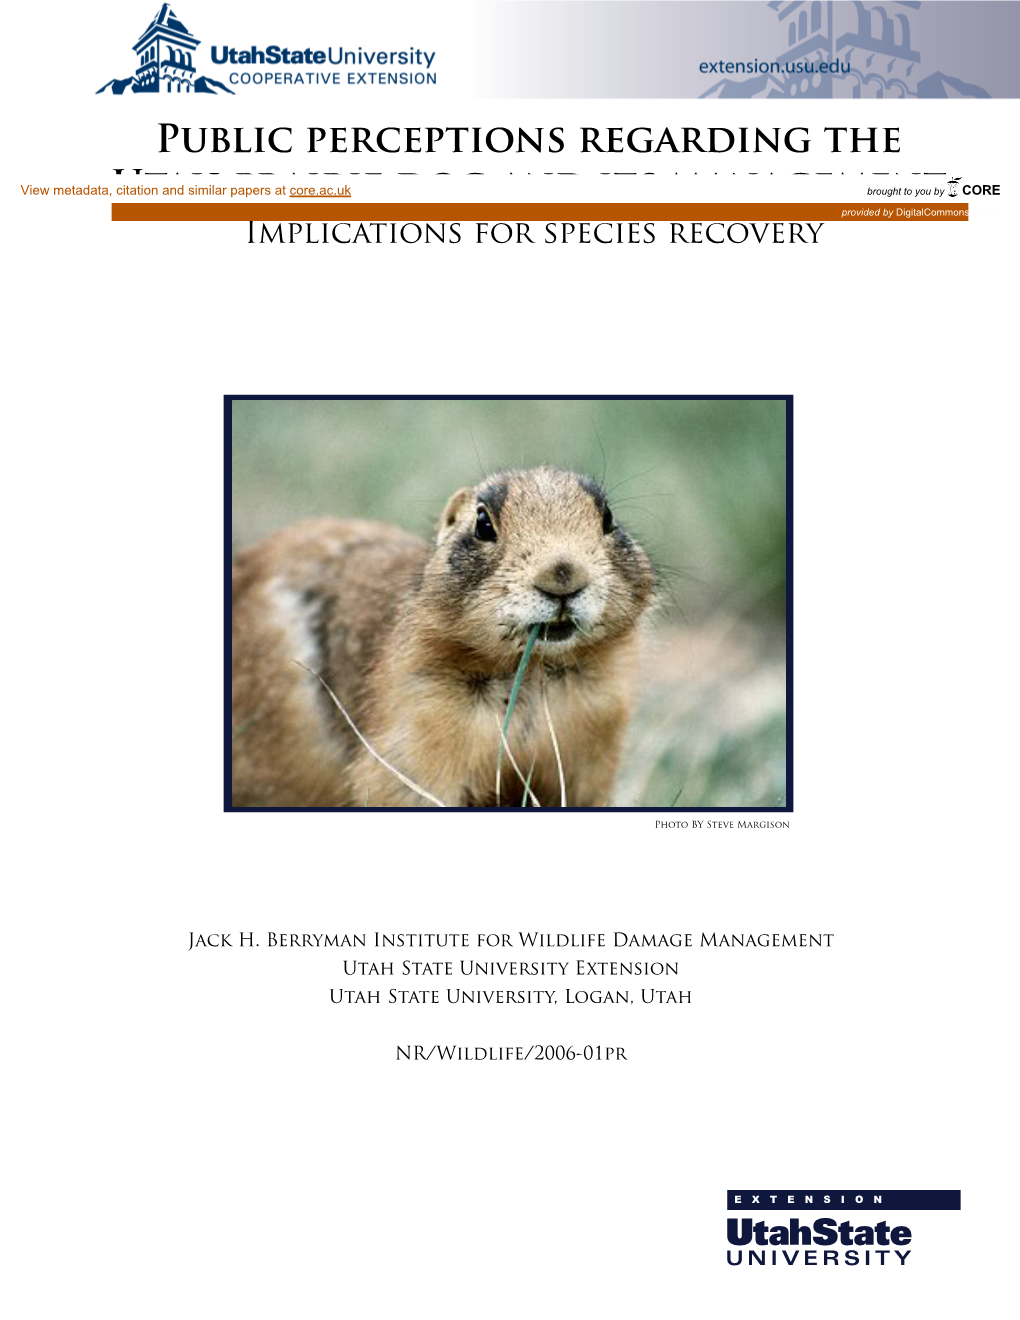 Public Perceptions Regarding the Utah Prairie Dog and Its Management: Implications for Species Recovery